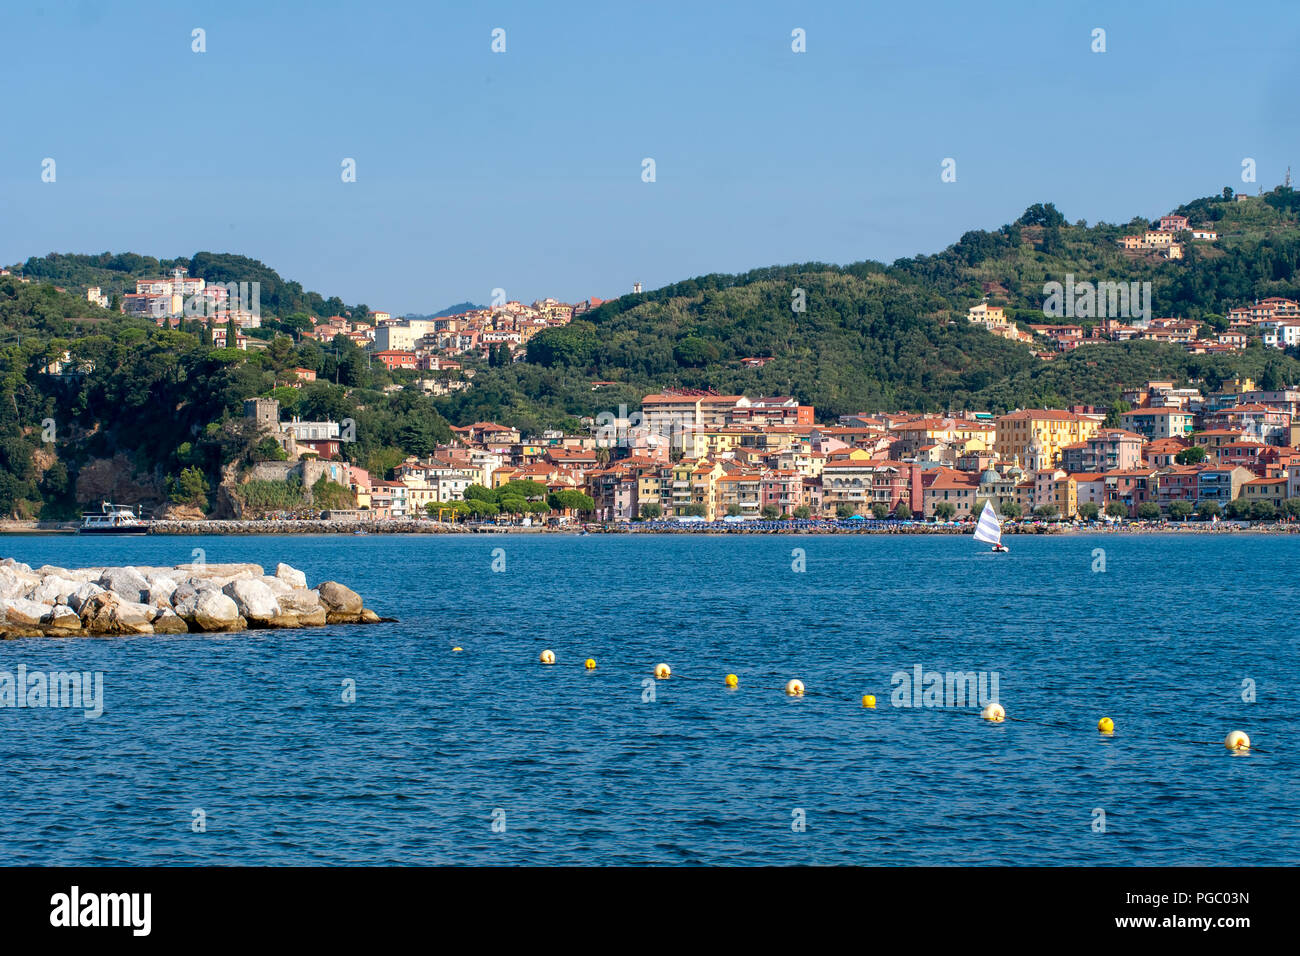 LERICI, LIGURIA, ITALY - AUGUST 18, 2018: View across the bay of popular tourist destination of Lerici to San Terenzo village. Mediterranean coast, Italy. Busy sunny summer day. Stock Photo